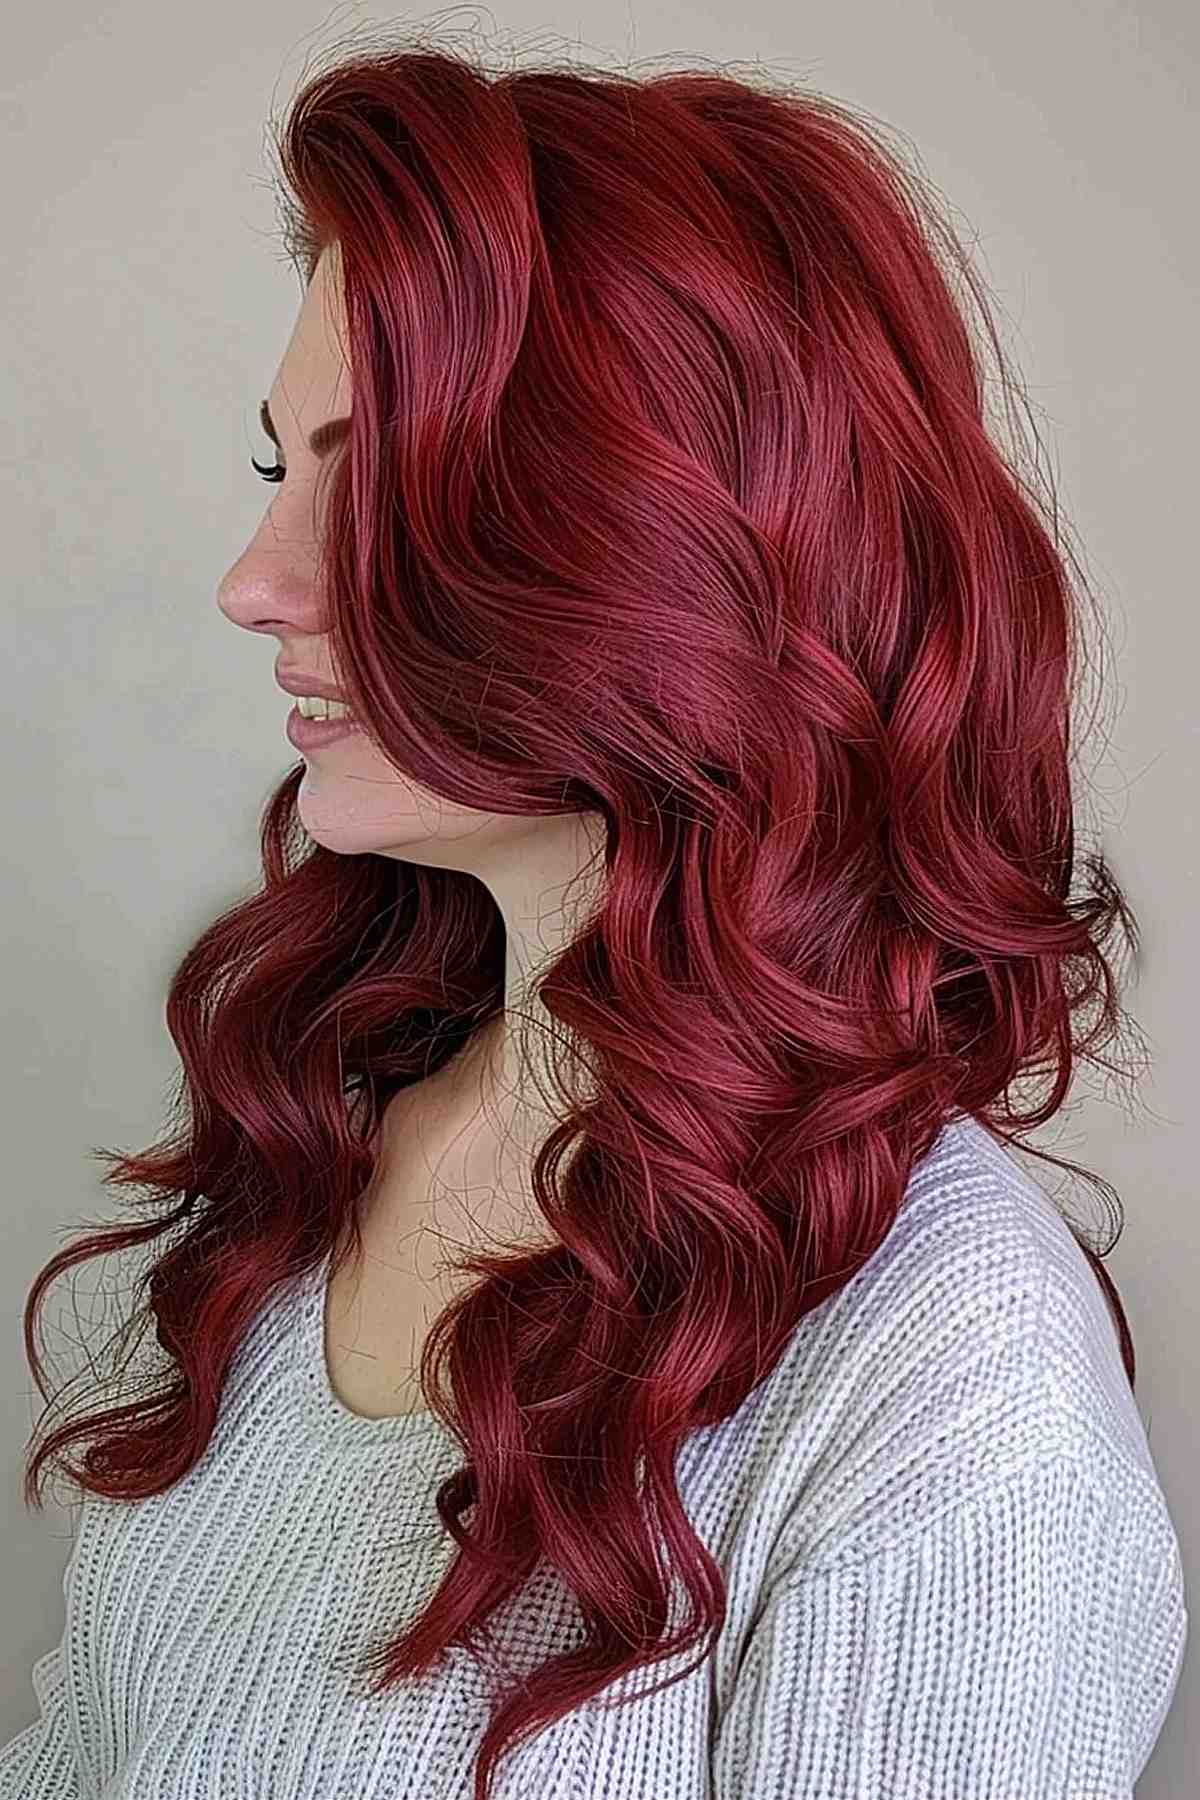 Vibrant cherry red hair with naturally curly ends, ideal for thick hair.